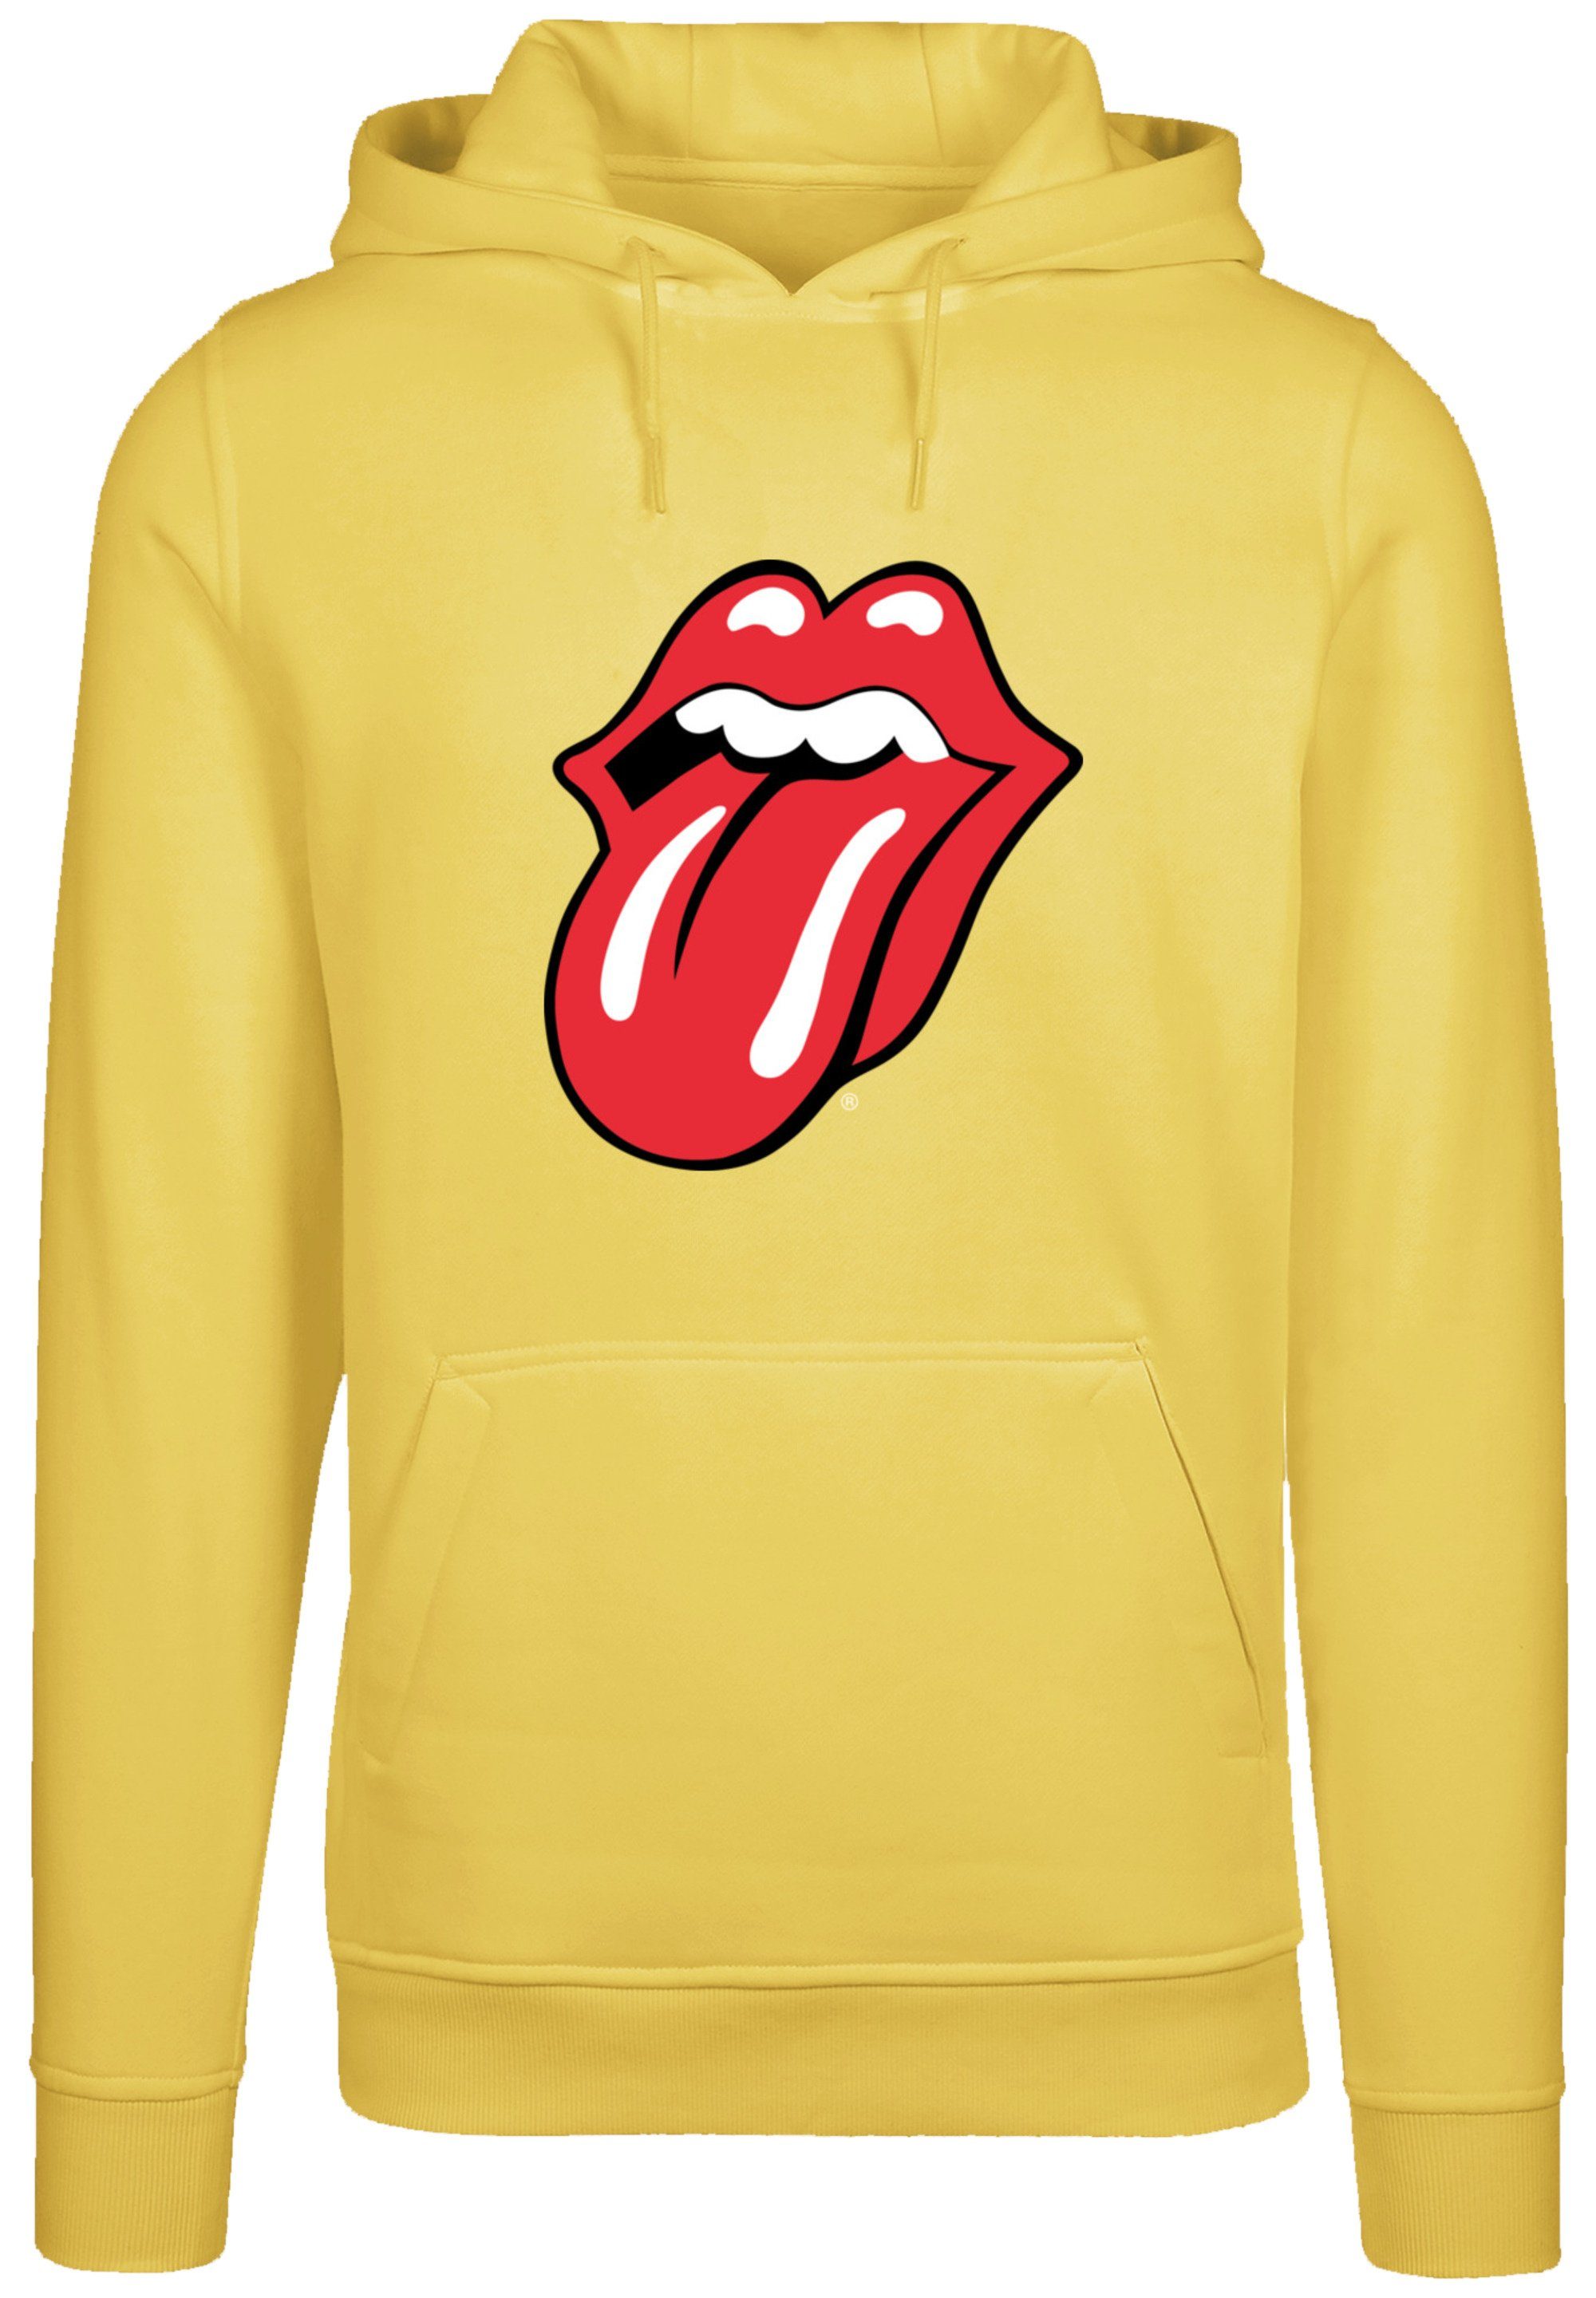 Warm, Band Musik Kapuzenpullover Zunge The Classic Stones Bequem Rolling F4NT4STIC yellow taxi Rock Hoodie,